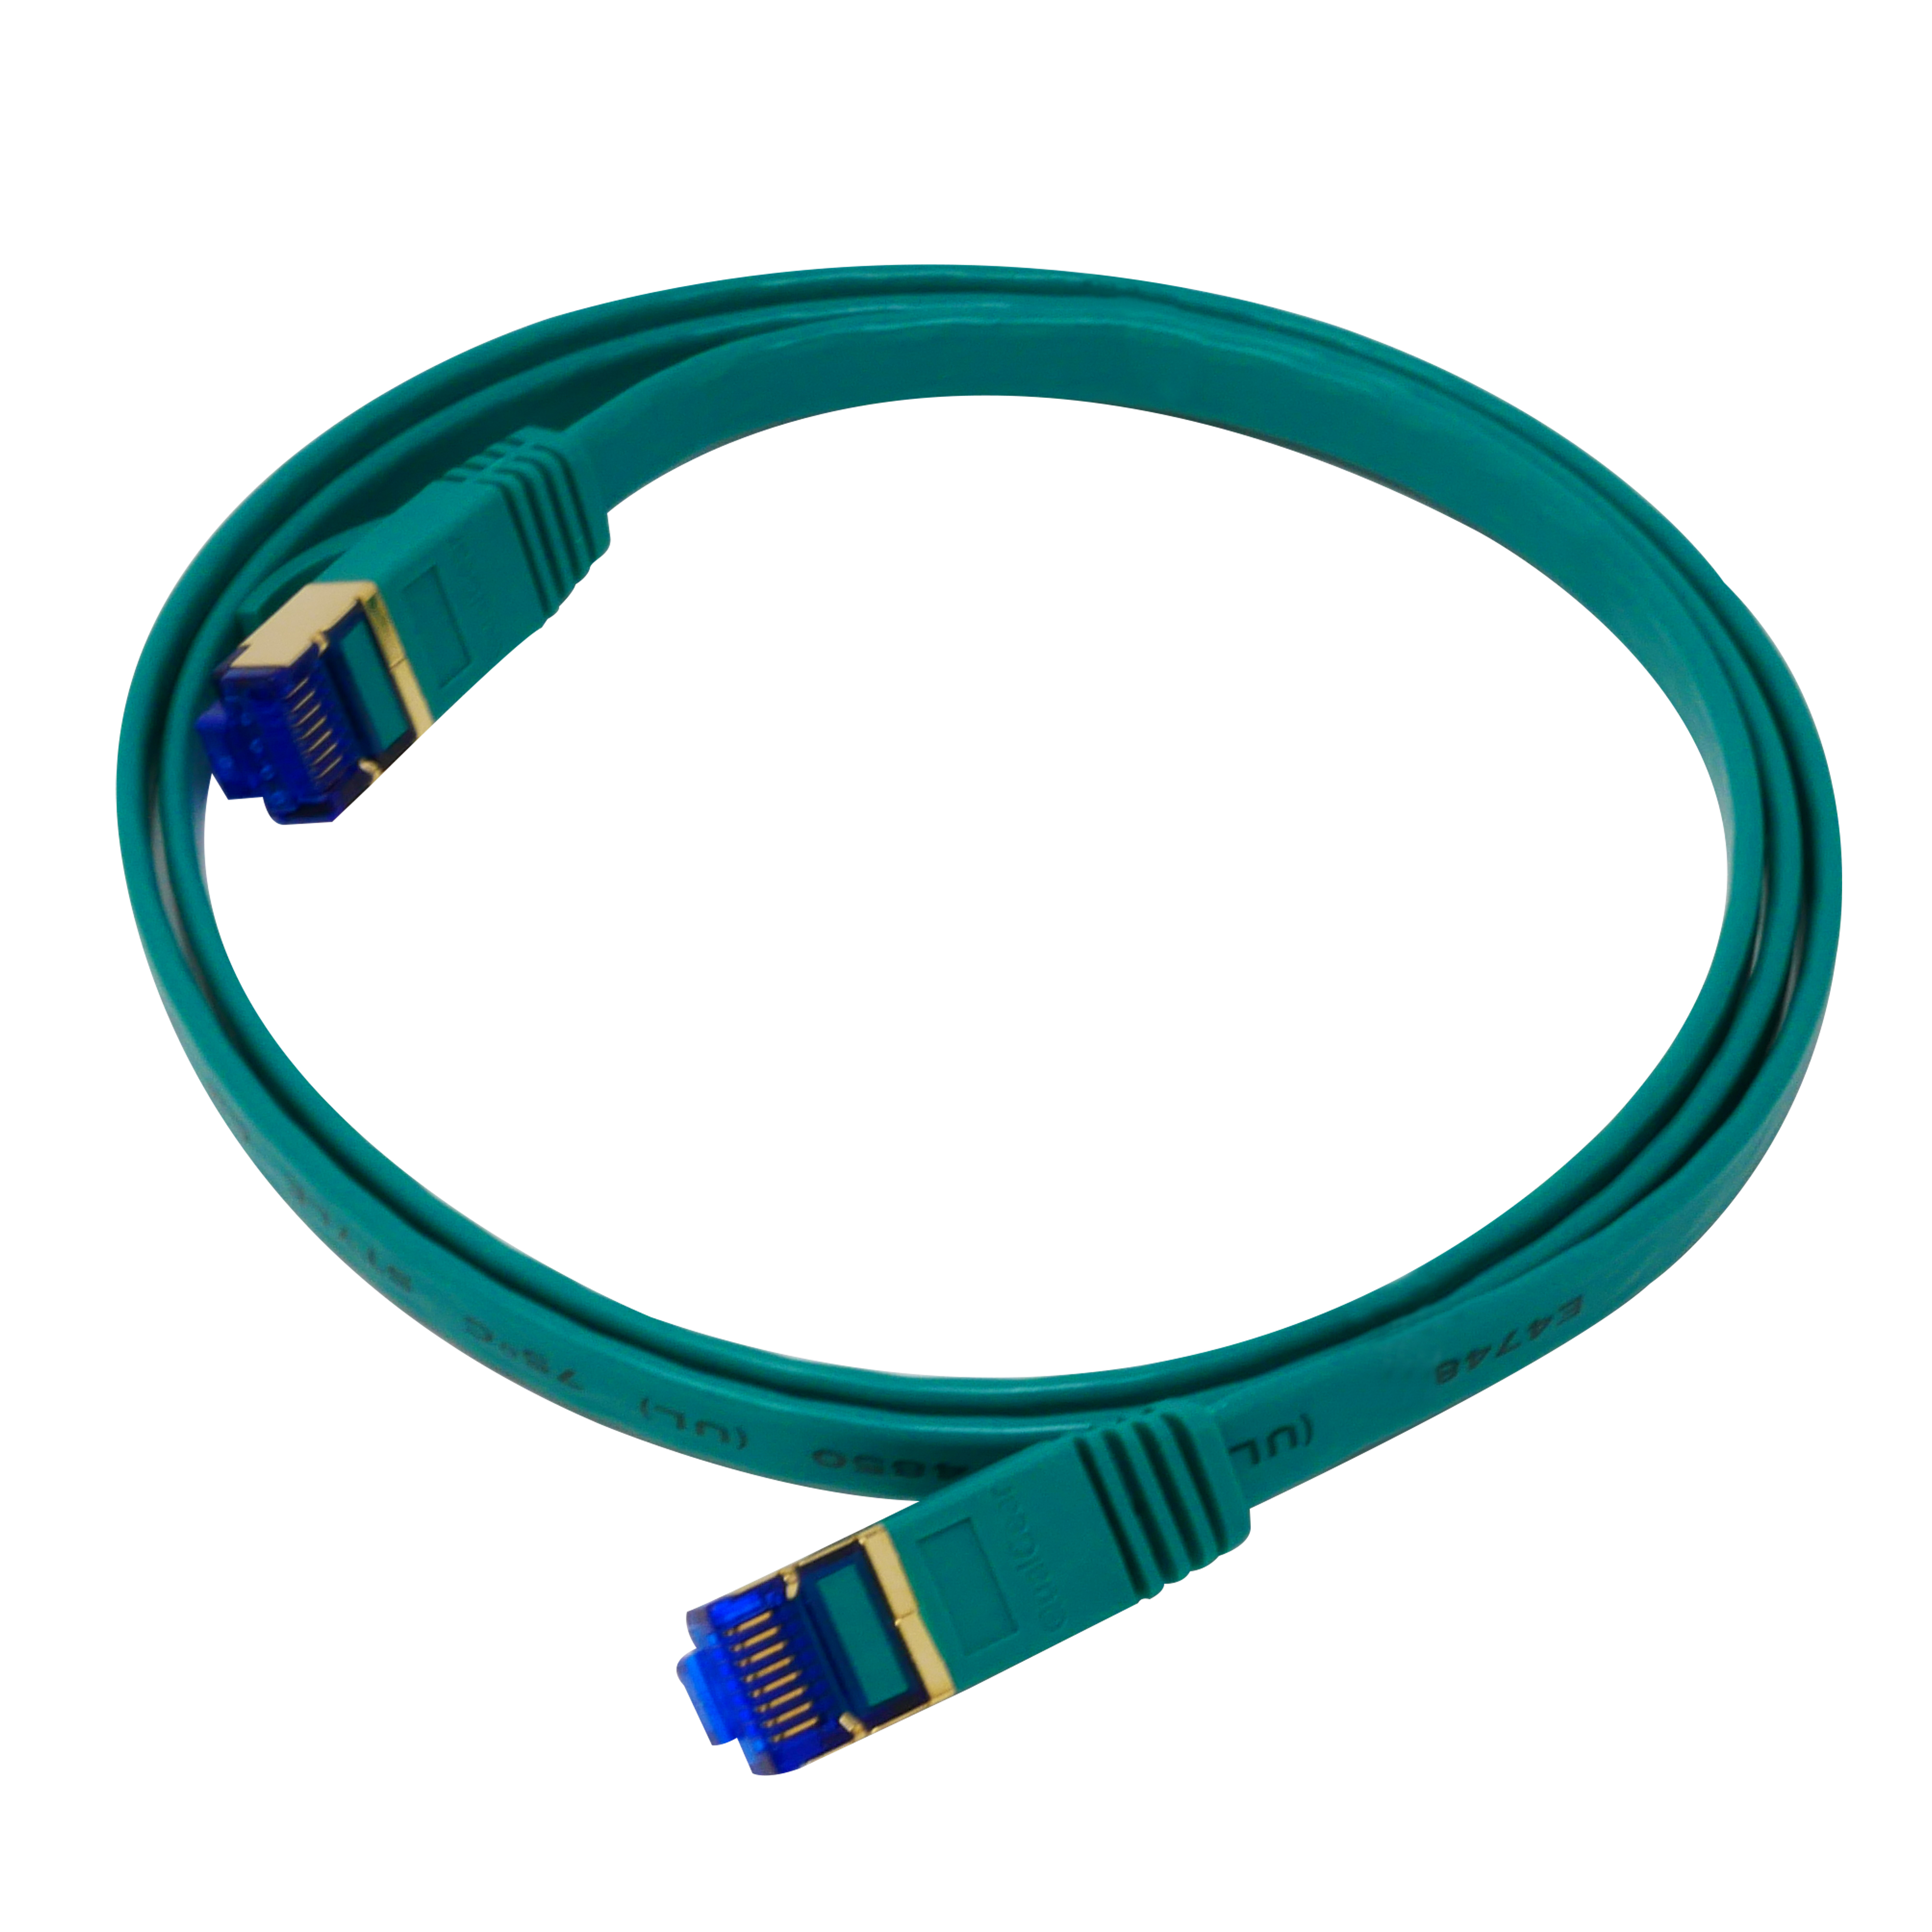 QualGear QG-CAT7F-3FT-GRN CAT 7 S/FTP Ethernet Cable Length 3 feet - 26 AWG, 10 Gbps, Gold Plated Contacts, RJ45, 99.99% OFC Copper, Color Green